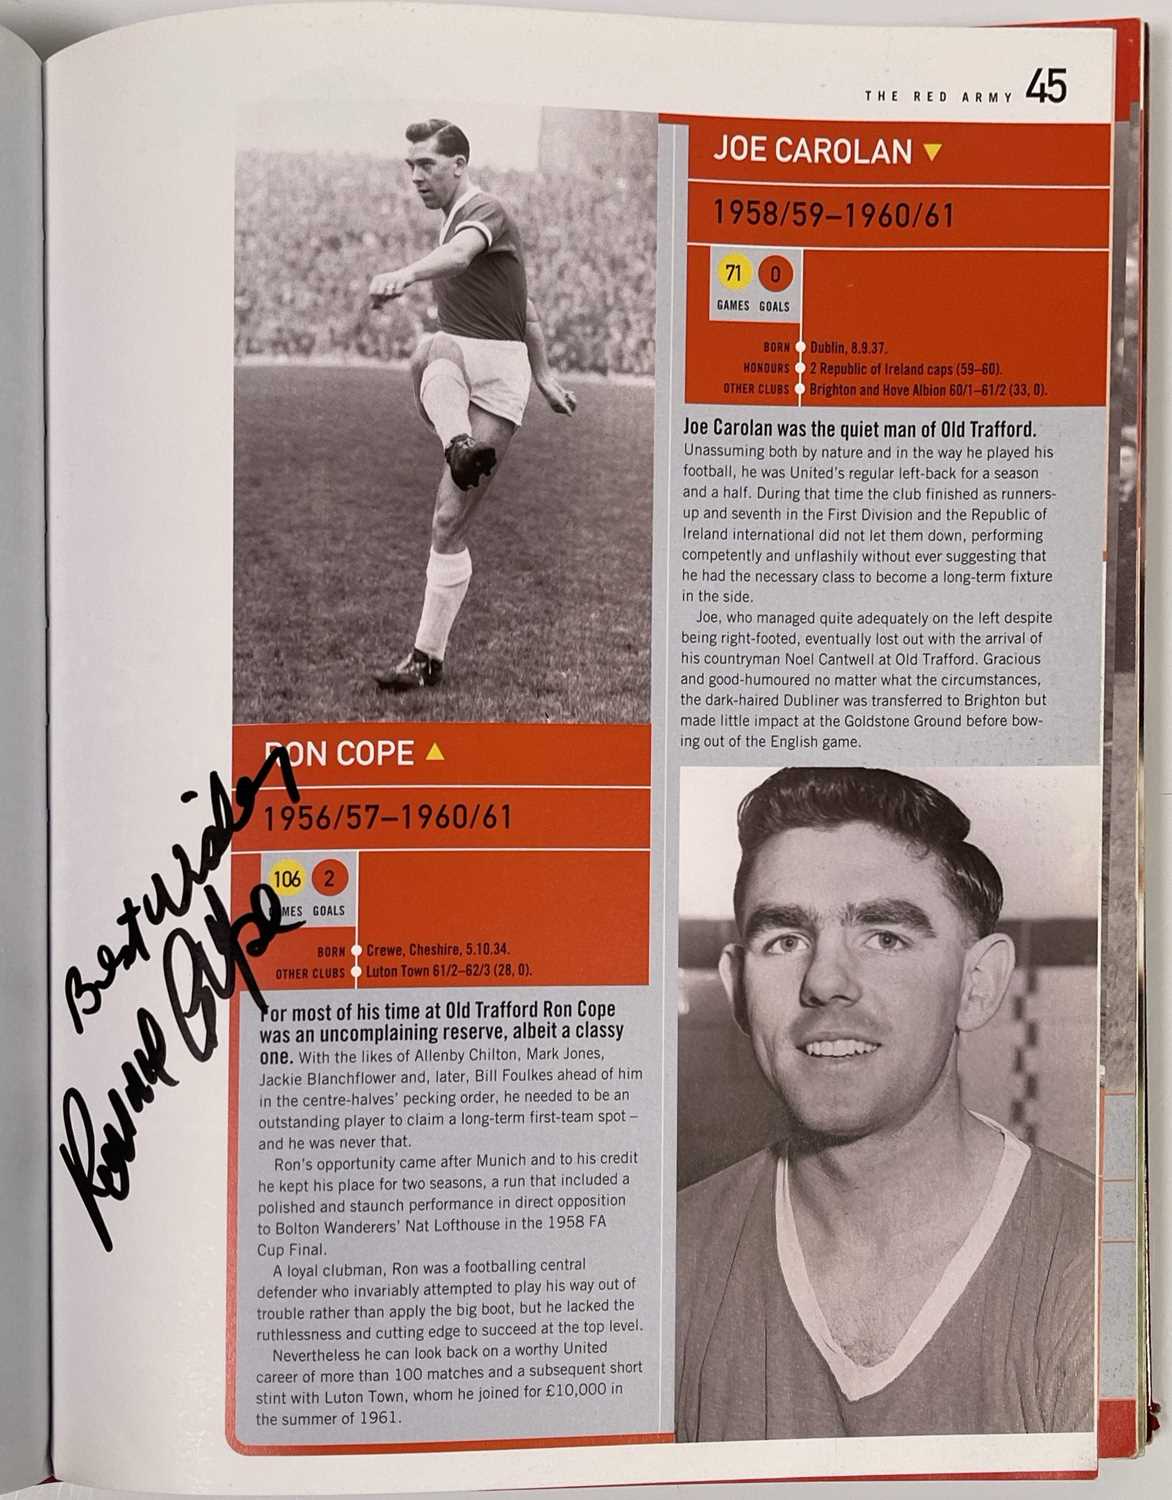 FOOTBALL MEMORABILIA - MANCHESTER UNITED - MULTI SIGNED PLAYER BY PLAYER BOOK. - Image 10 of 35